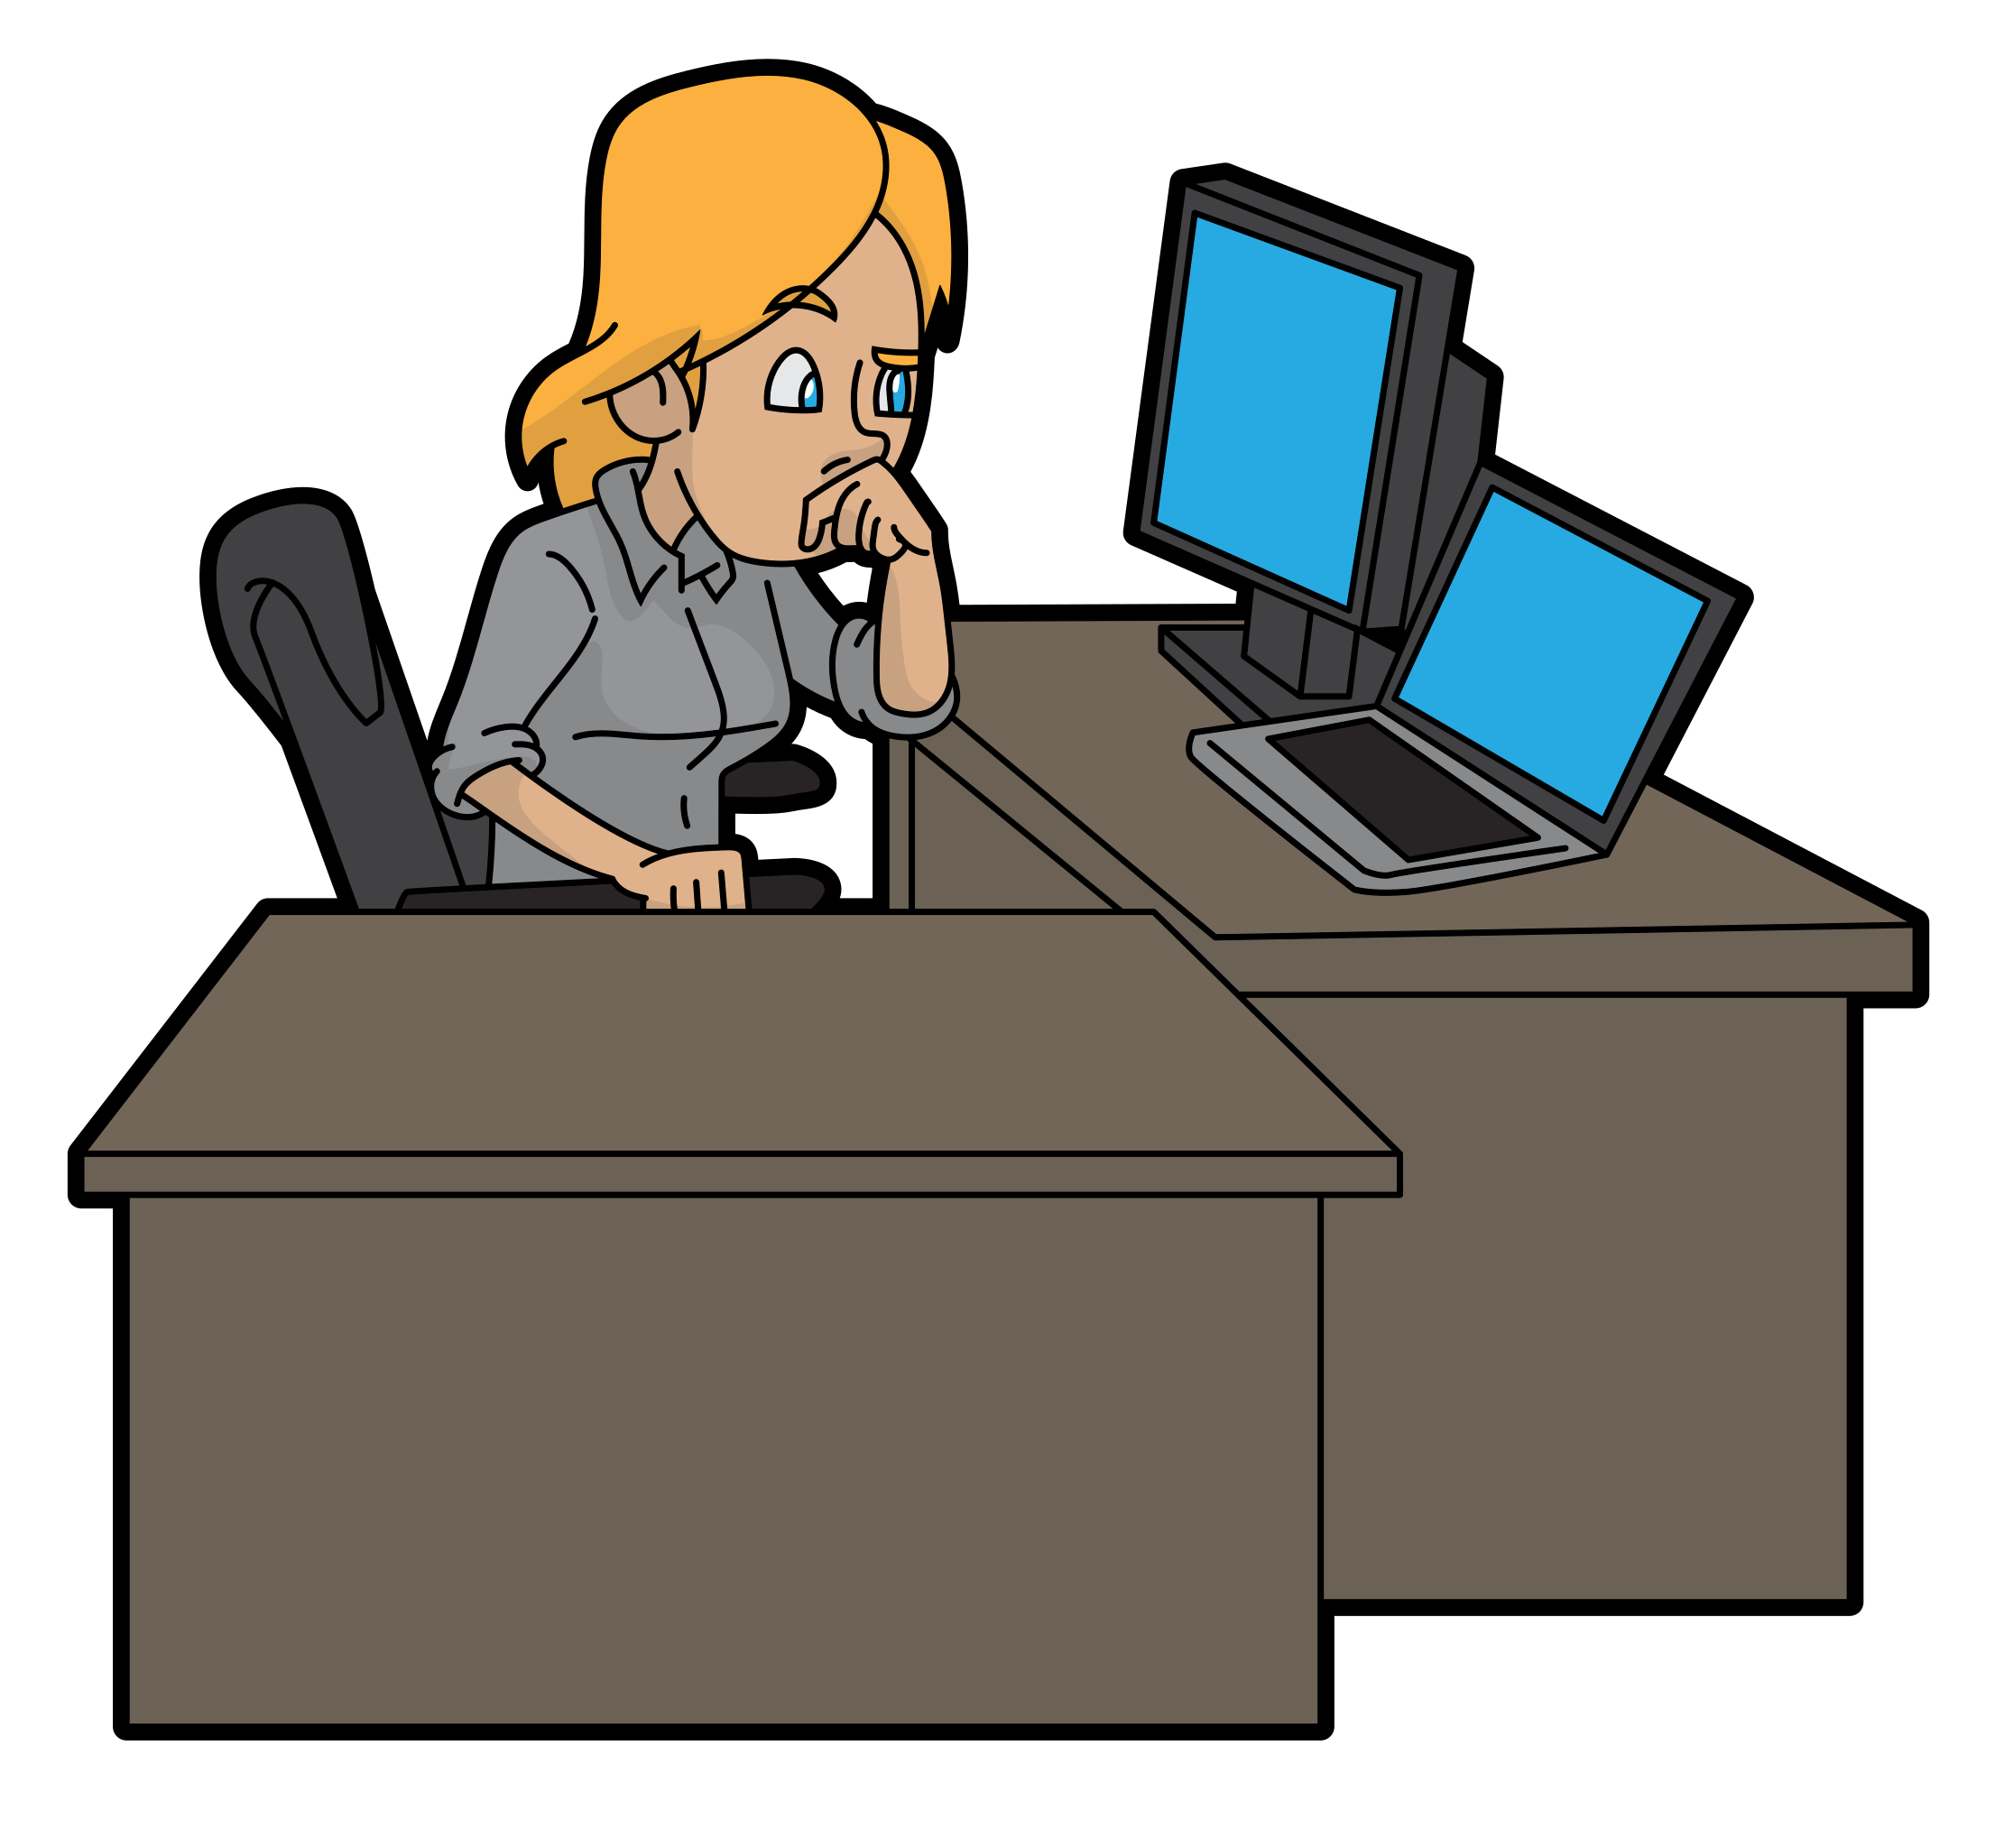 File:Cartoon Woman Trying To Solve A Problem Using Her Office   - Wikimedia Commons